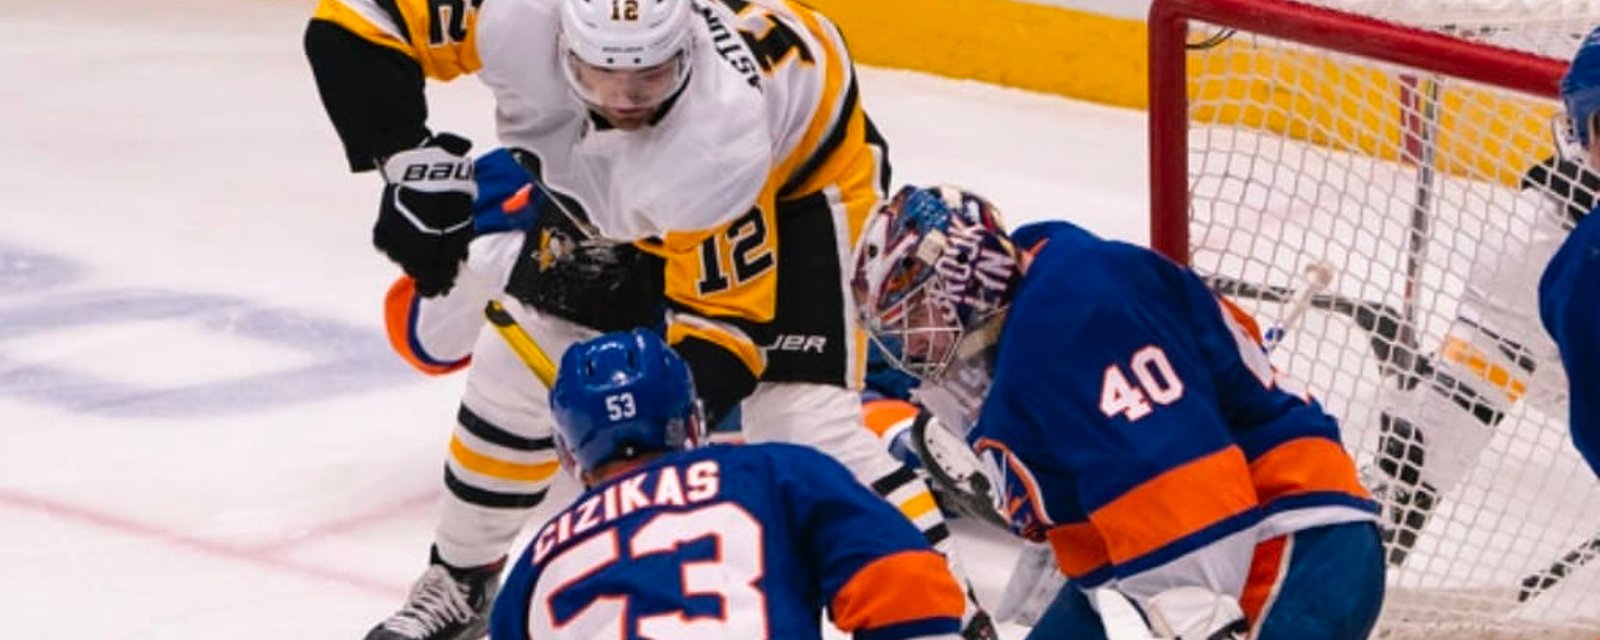 Terrible news for Islanders following 7-0 blowout loss to Penguins